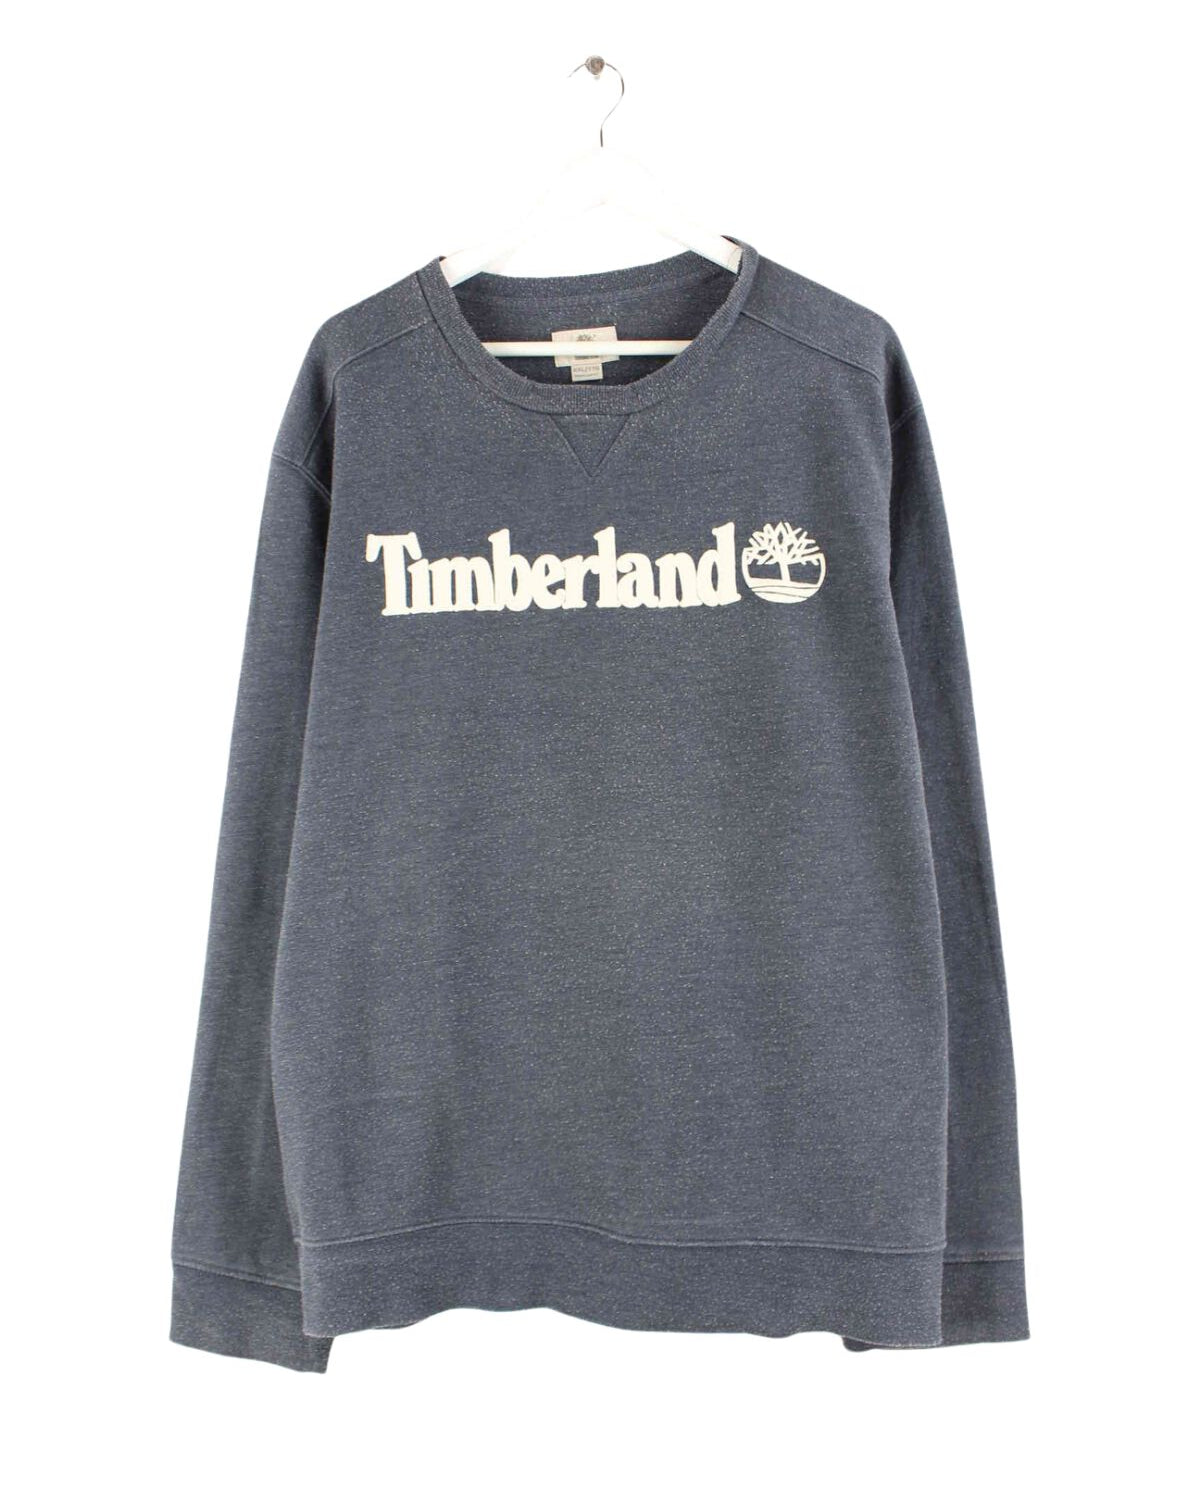 Timberland y2k Embroidered Logo Sweater Grau XXL (front image)